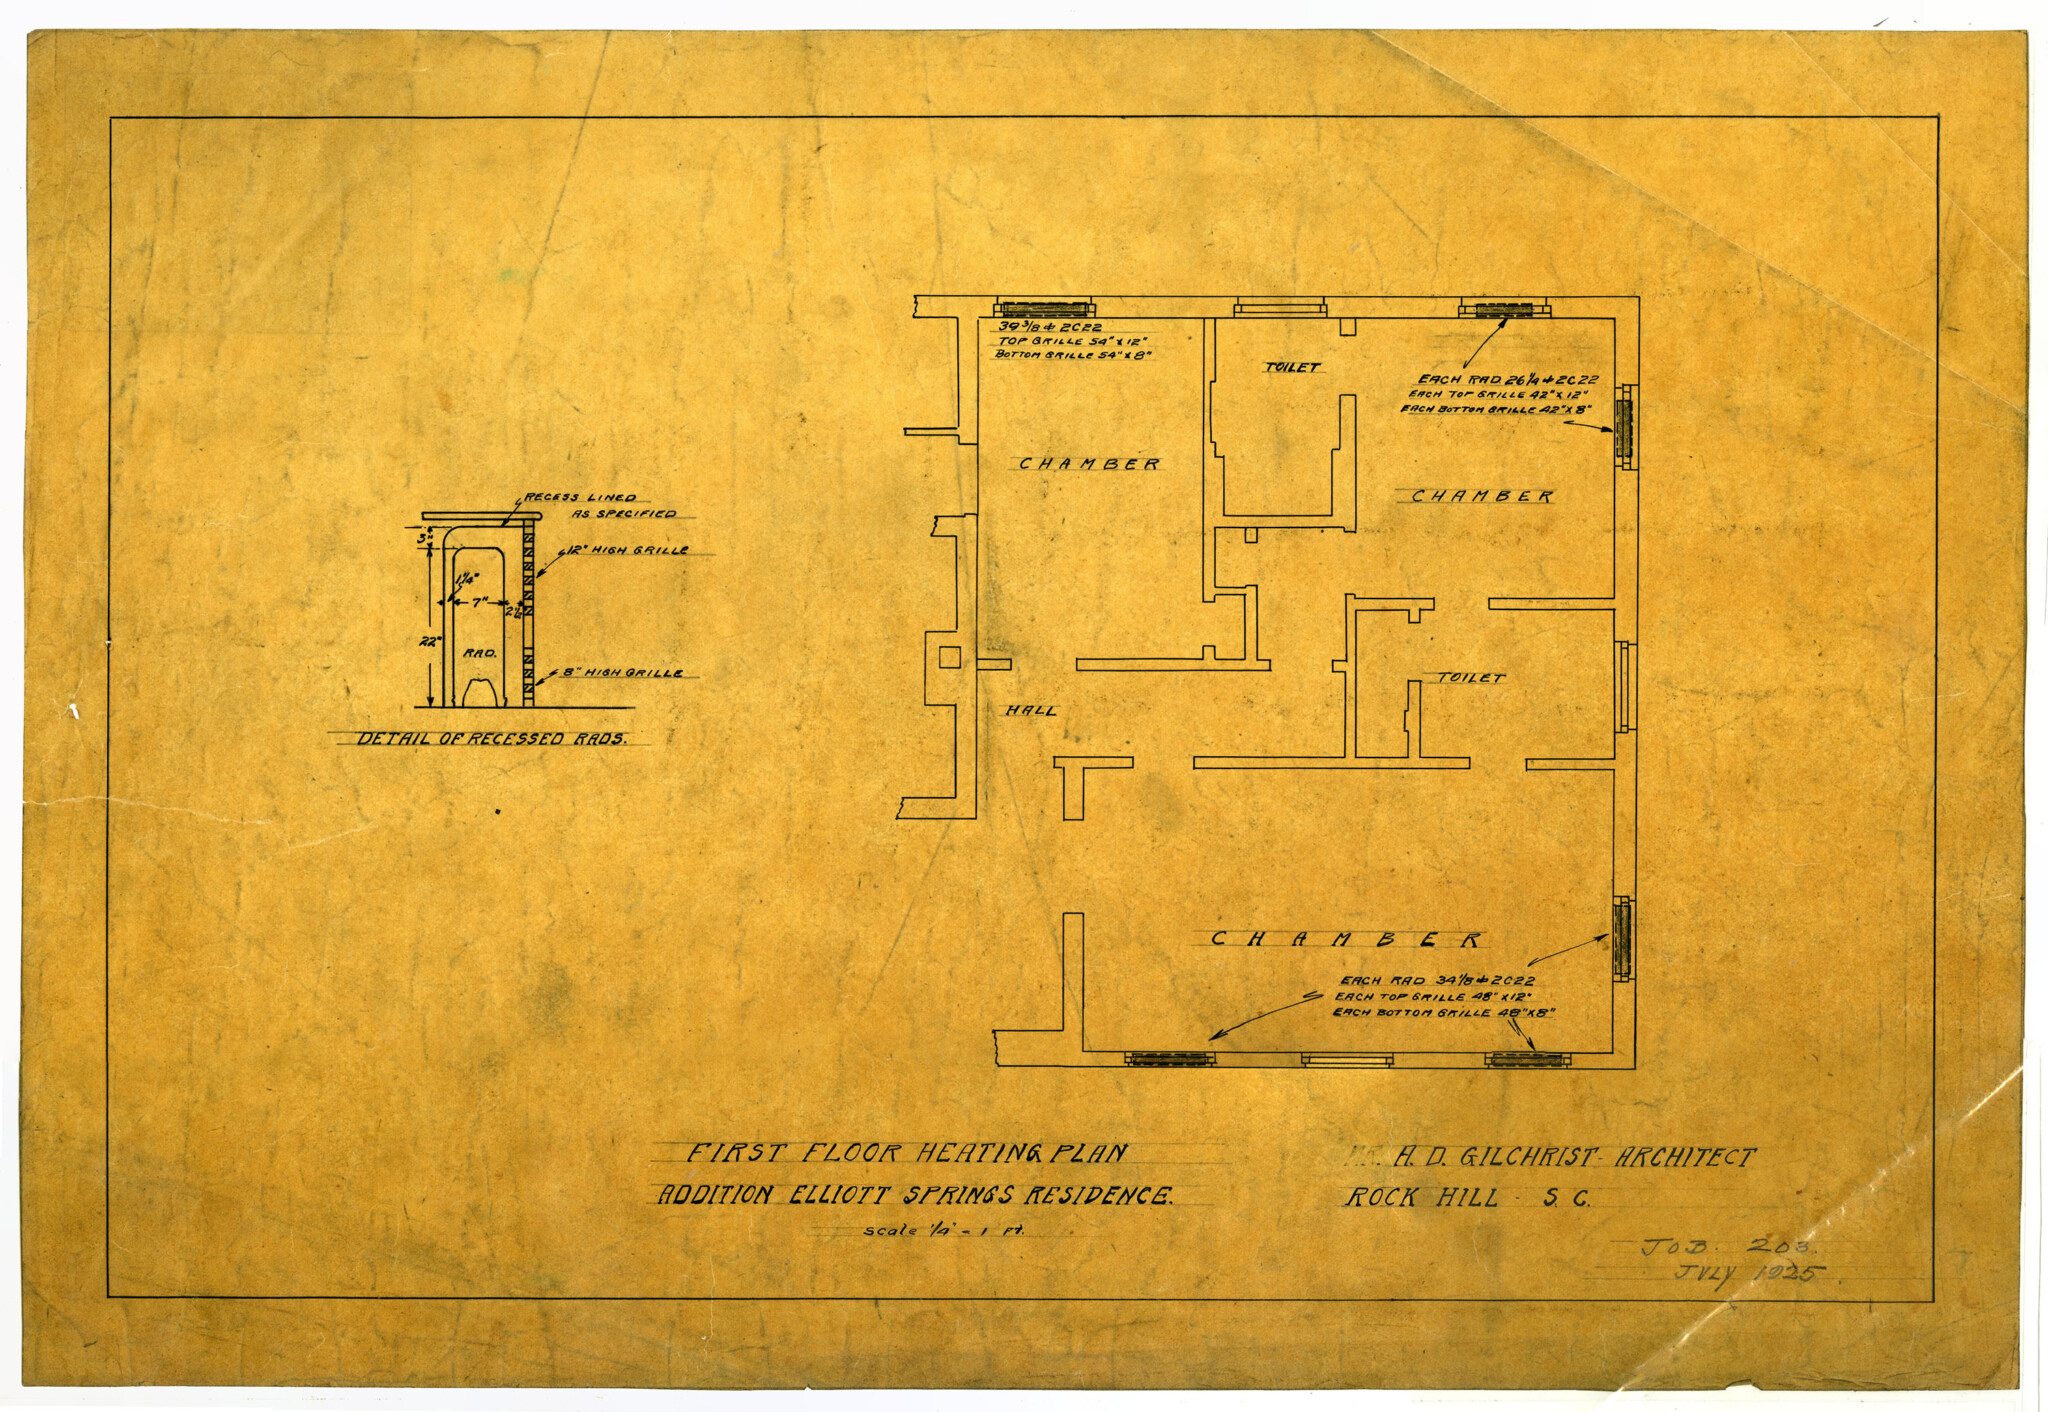 Architectural plans by A.D. Gilchrist of Rock Hill, S.C. - Courtesy of the WU Pettus Archives Collection, 2024